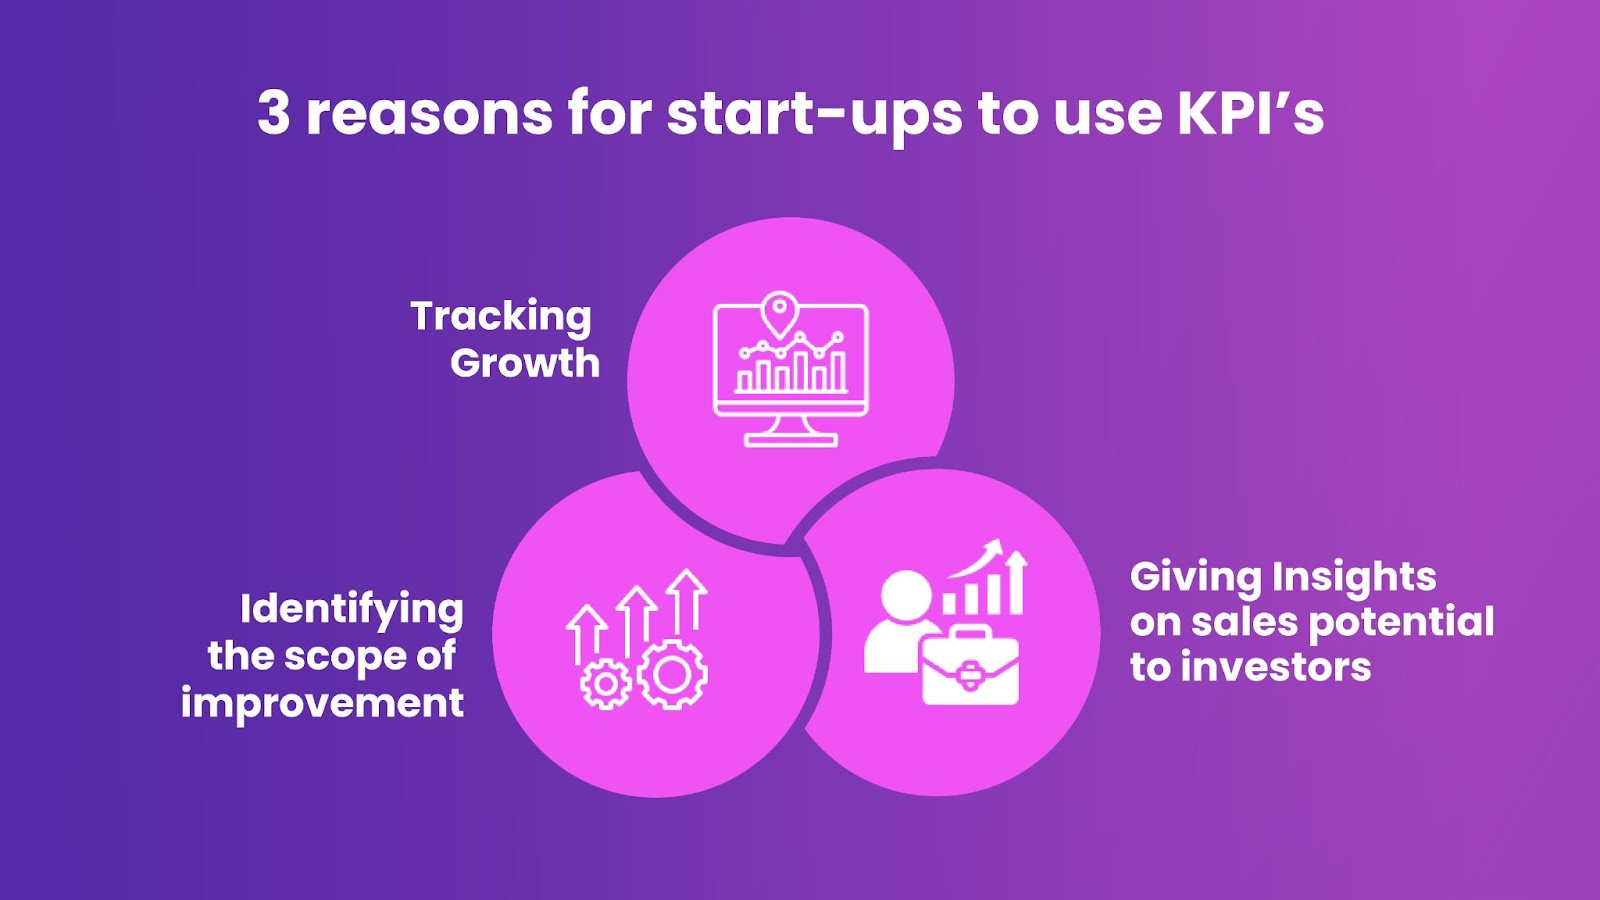 Reasons for start-ups to use KPI’s